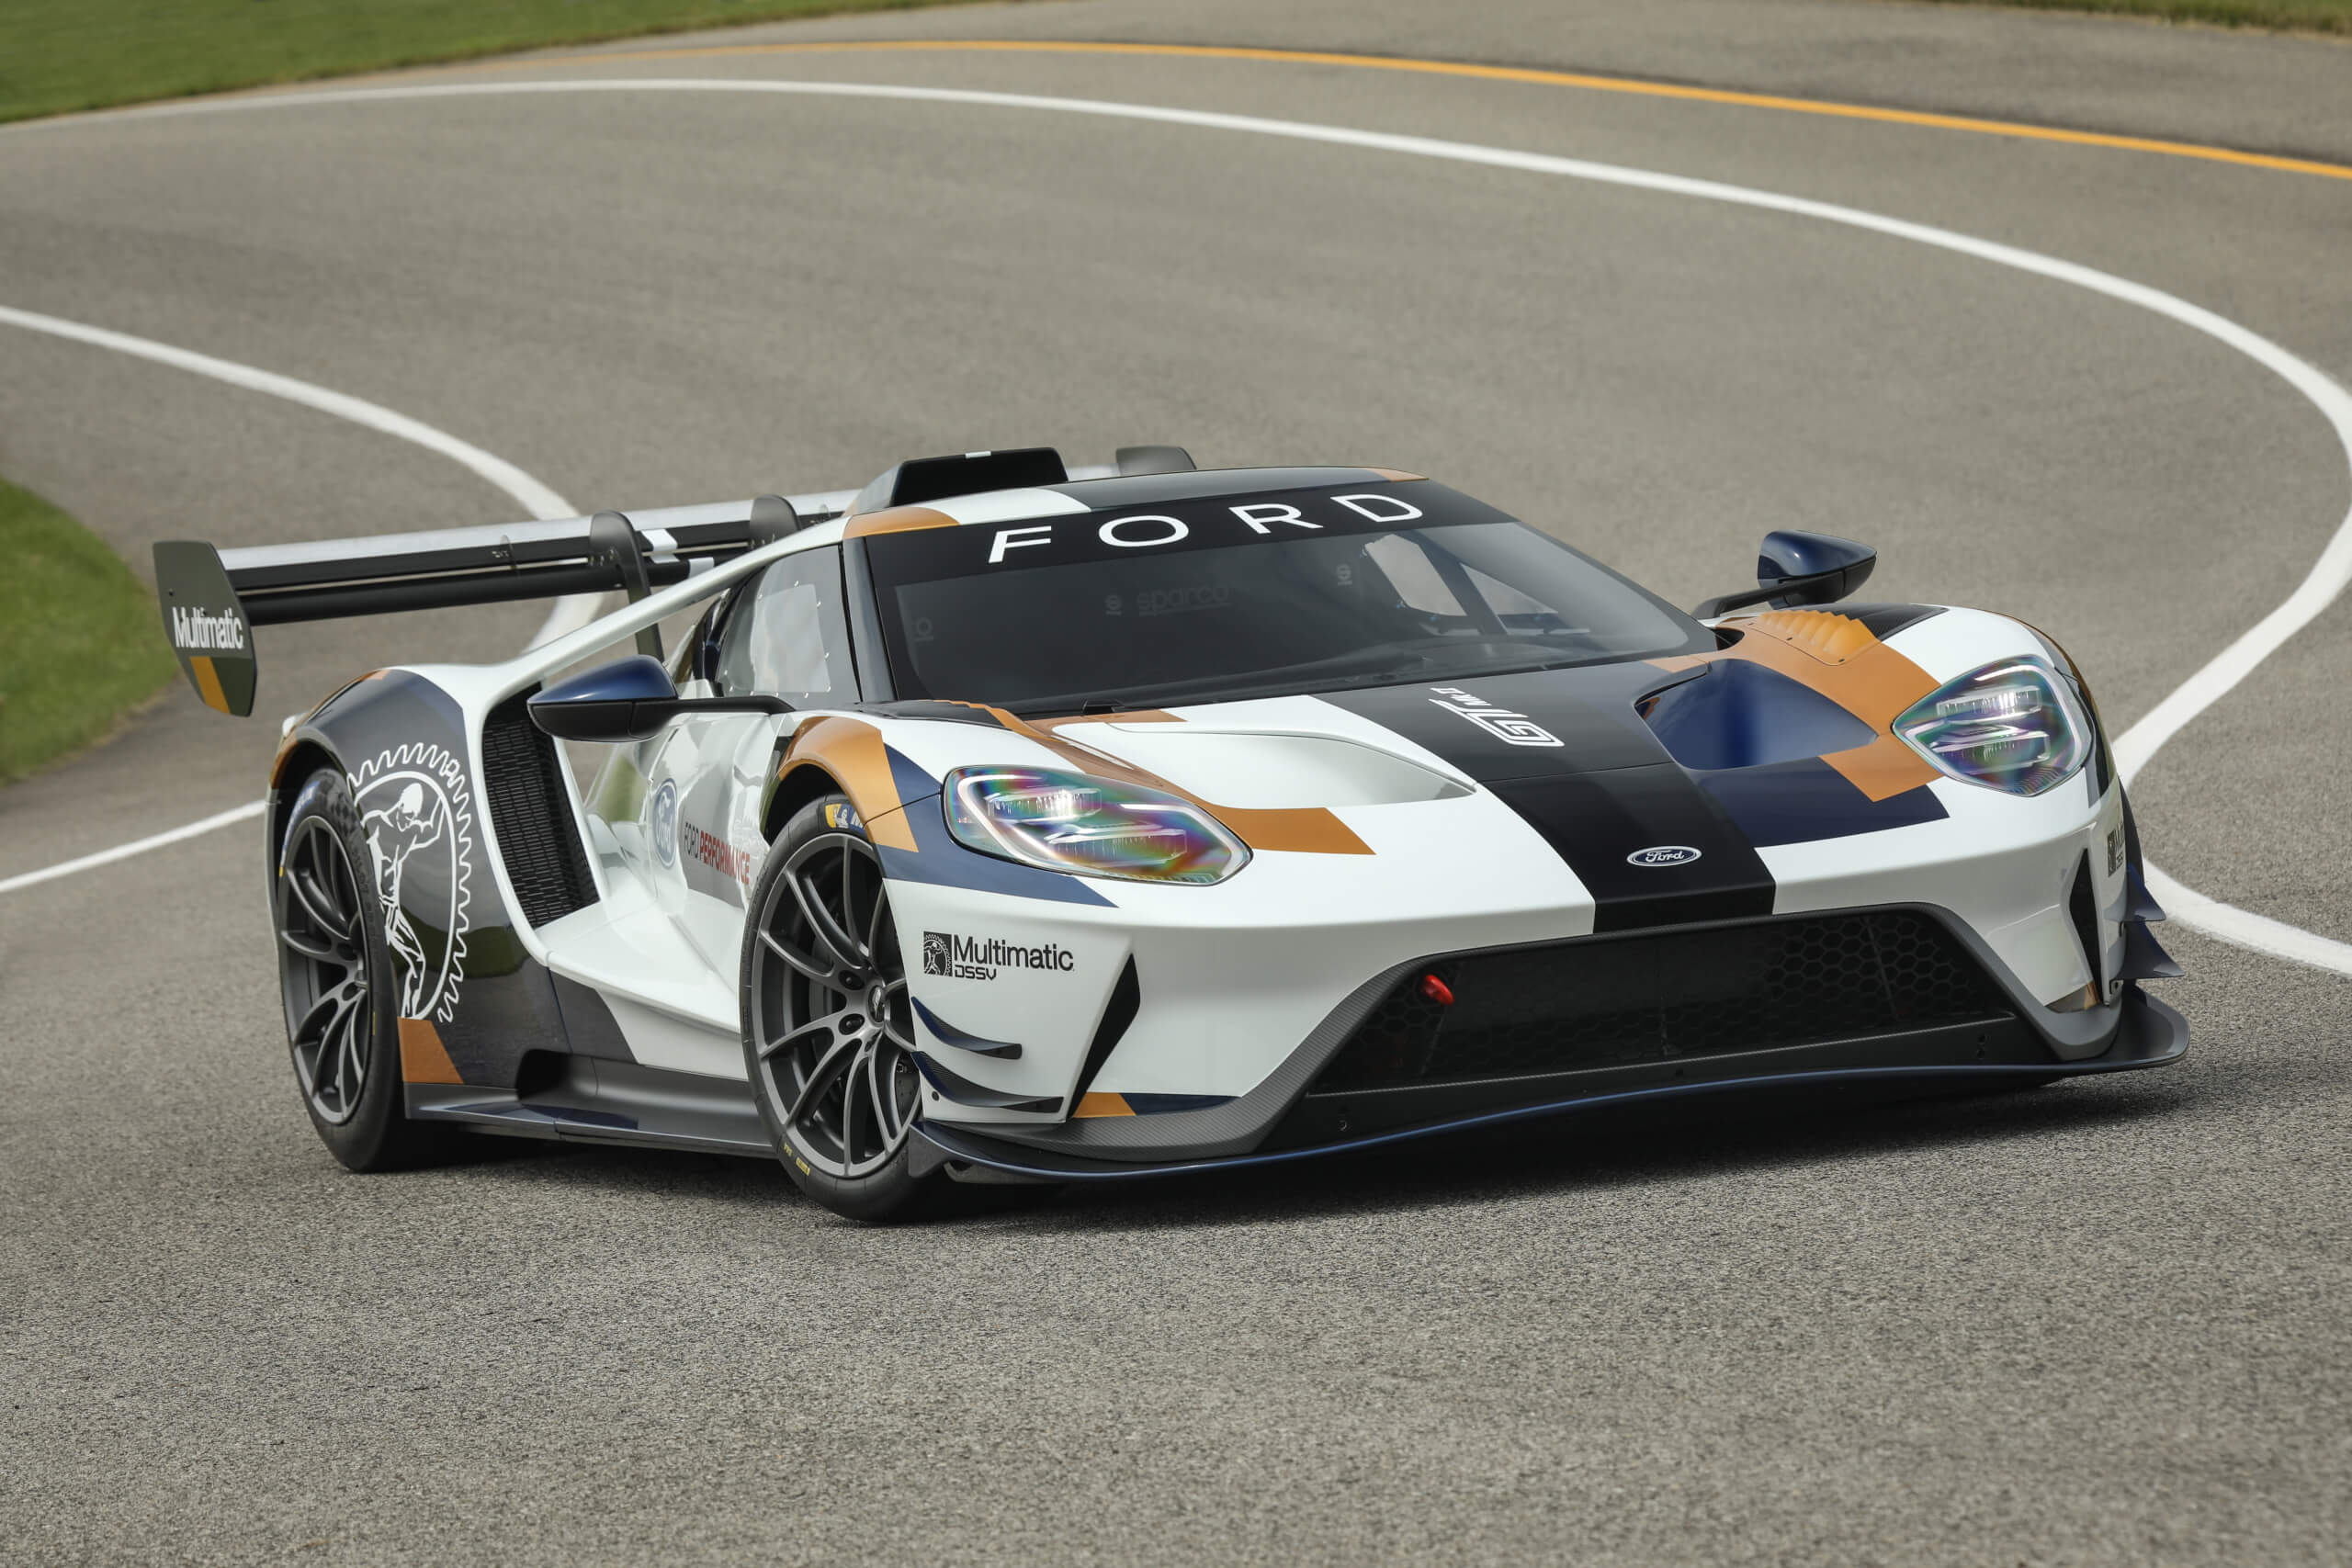 Created by Ford Performance and Multimatic, the Ford GT Mk II delivers the full performance potential of the Ford GT in a track-only version engineered independent of race series rules, regulations and limitations